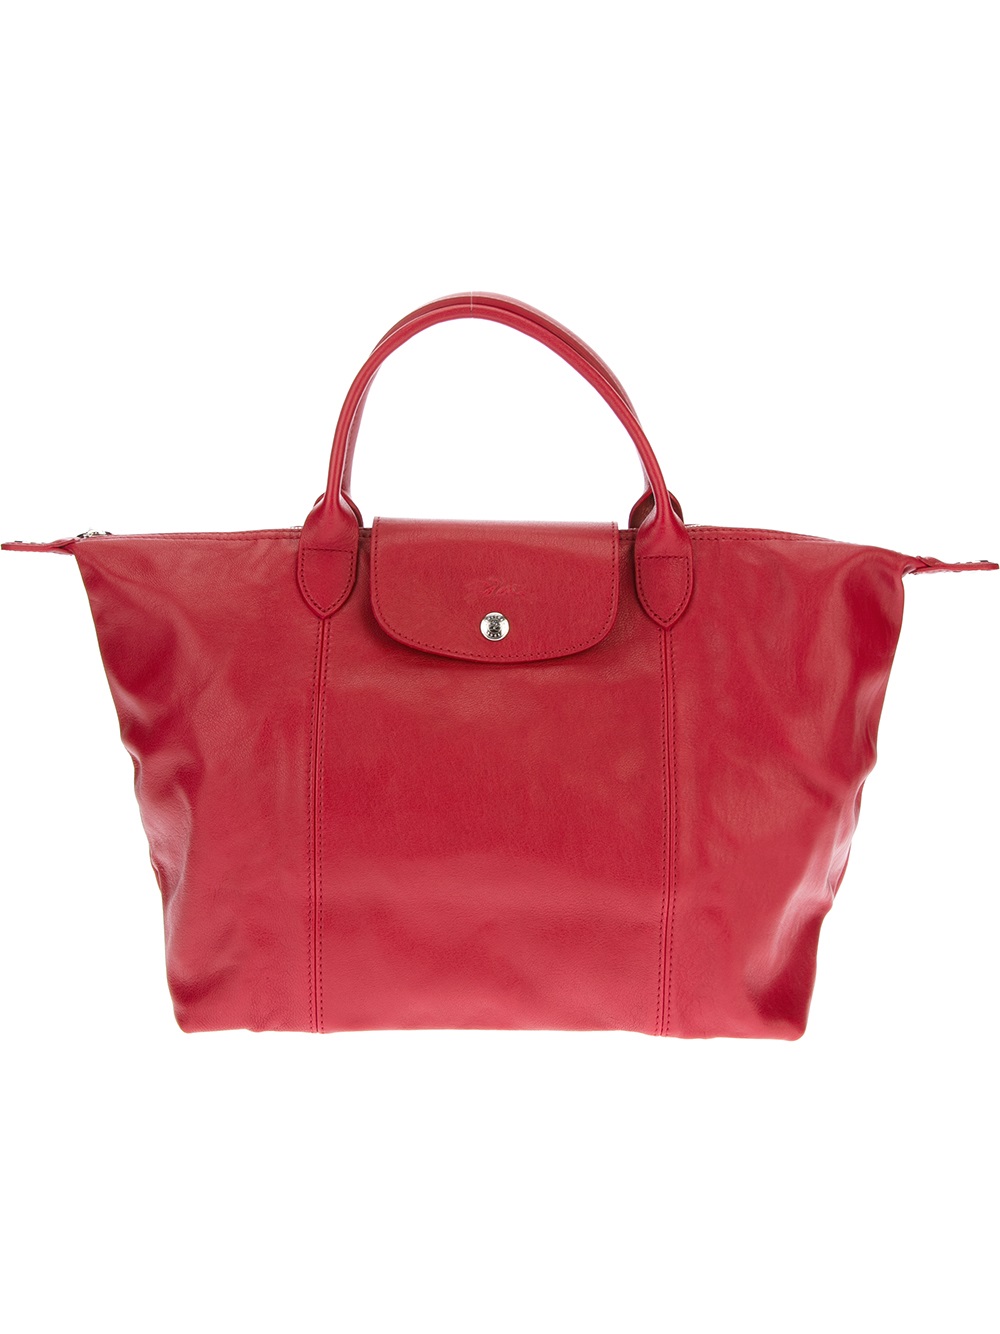 Lyst - Longchamp Le Pliage Tote Bag in Red